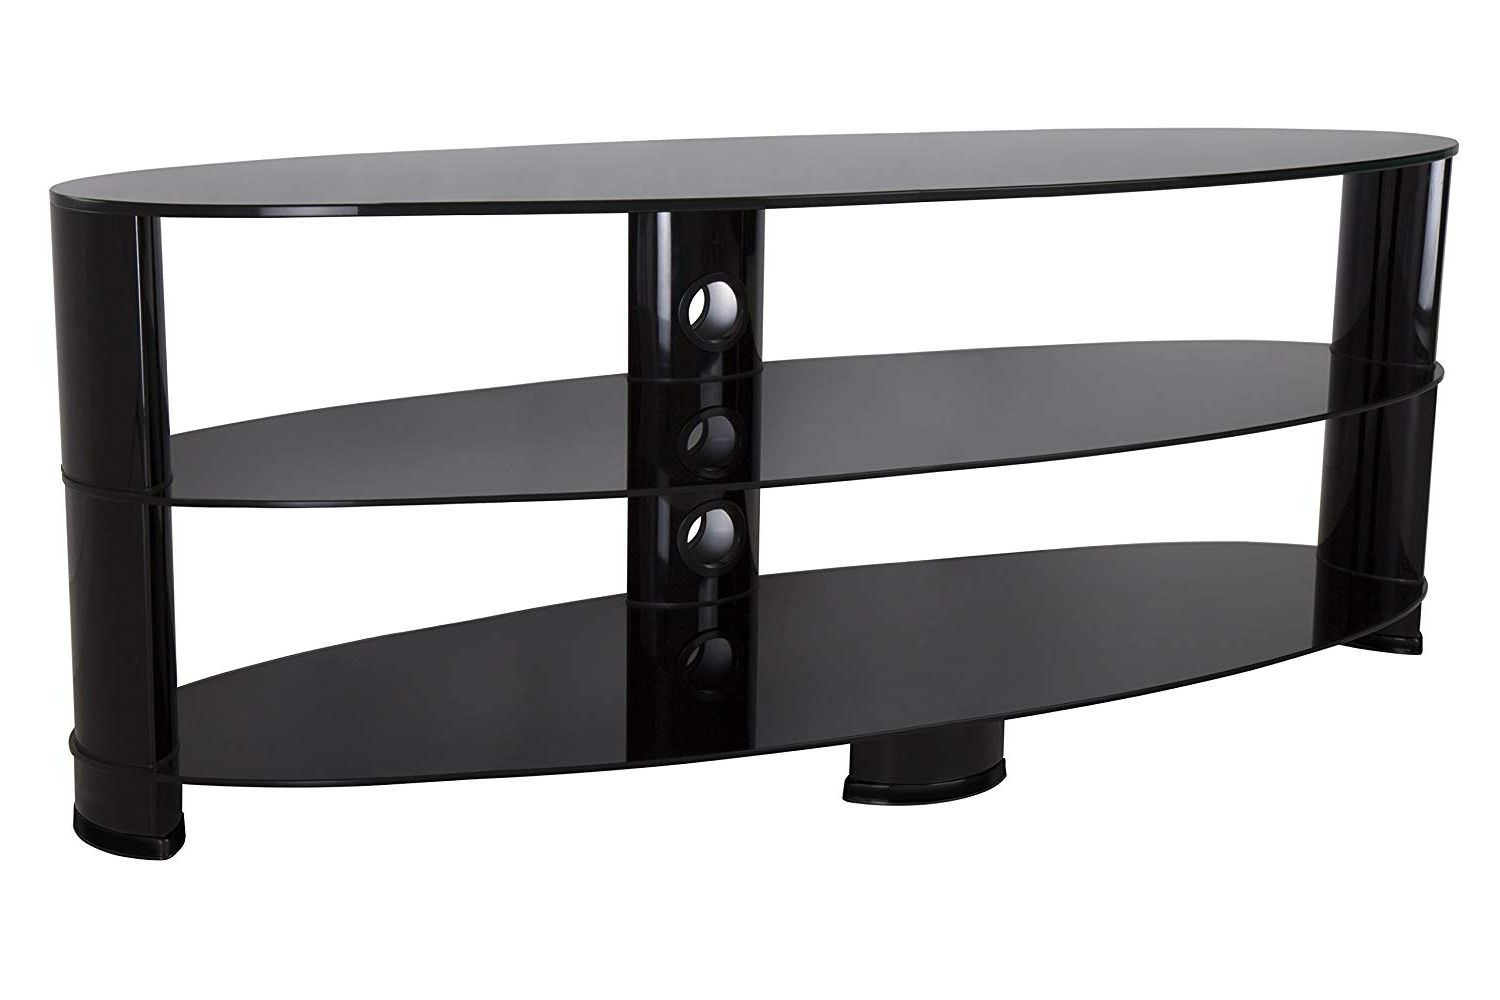 Amazon: Avf Ovl1400bb A Tv Stand Glass Shelves Tvs Up To 65 Inch Intended For Most Up To Date Glass Tv Stands (Photo 6 of 20)